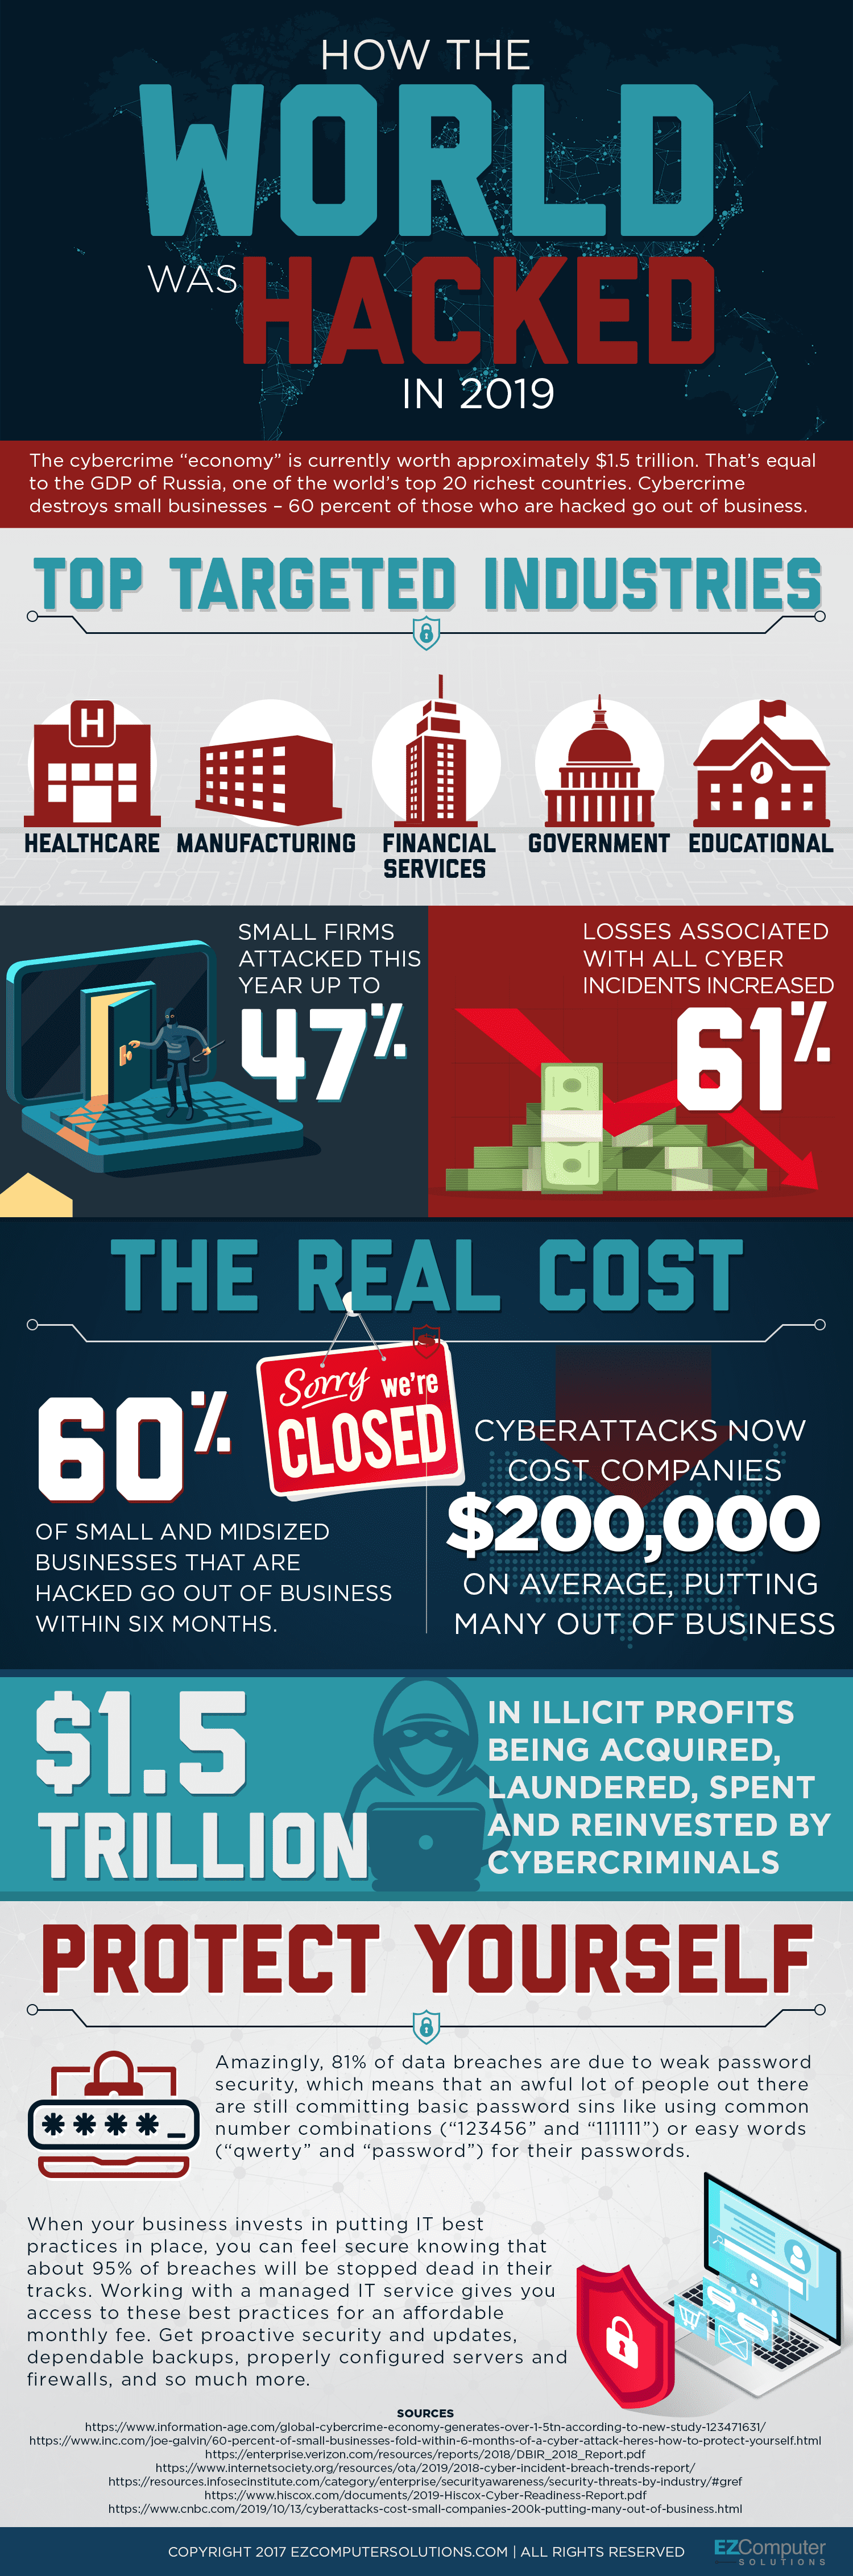 The Cost of Cyberattacks Continues to Rise